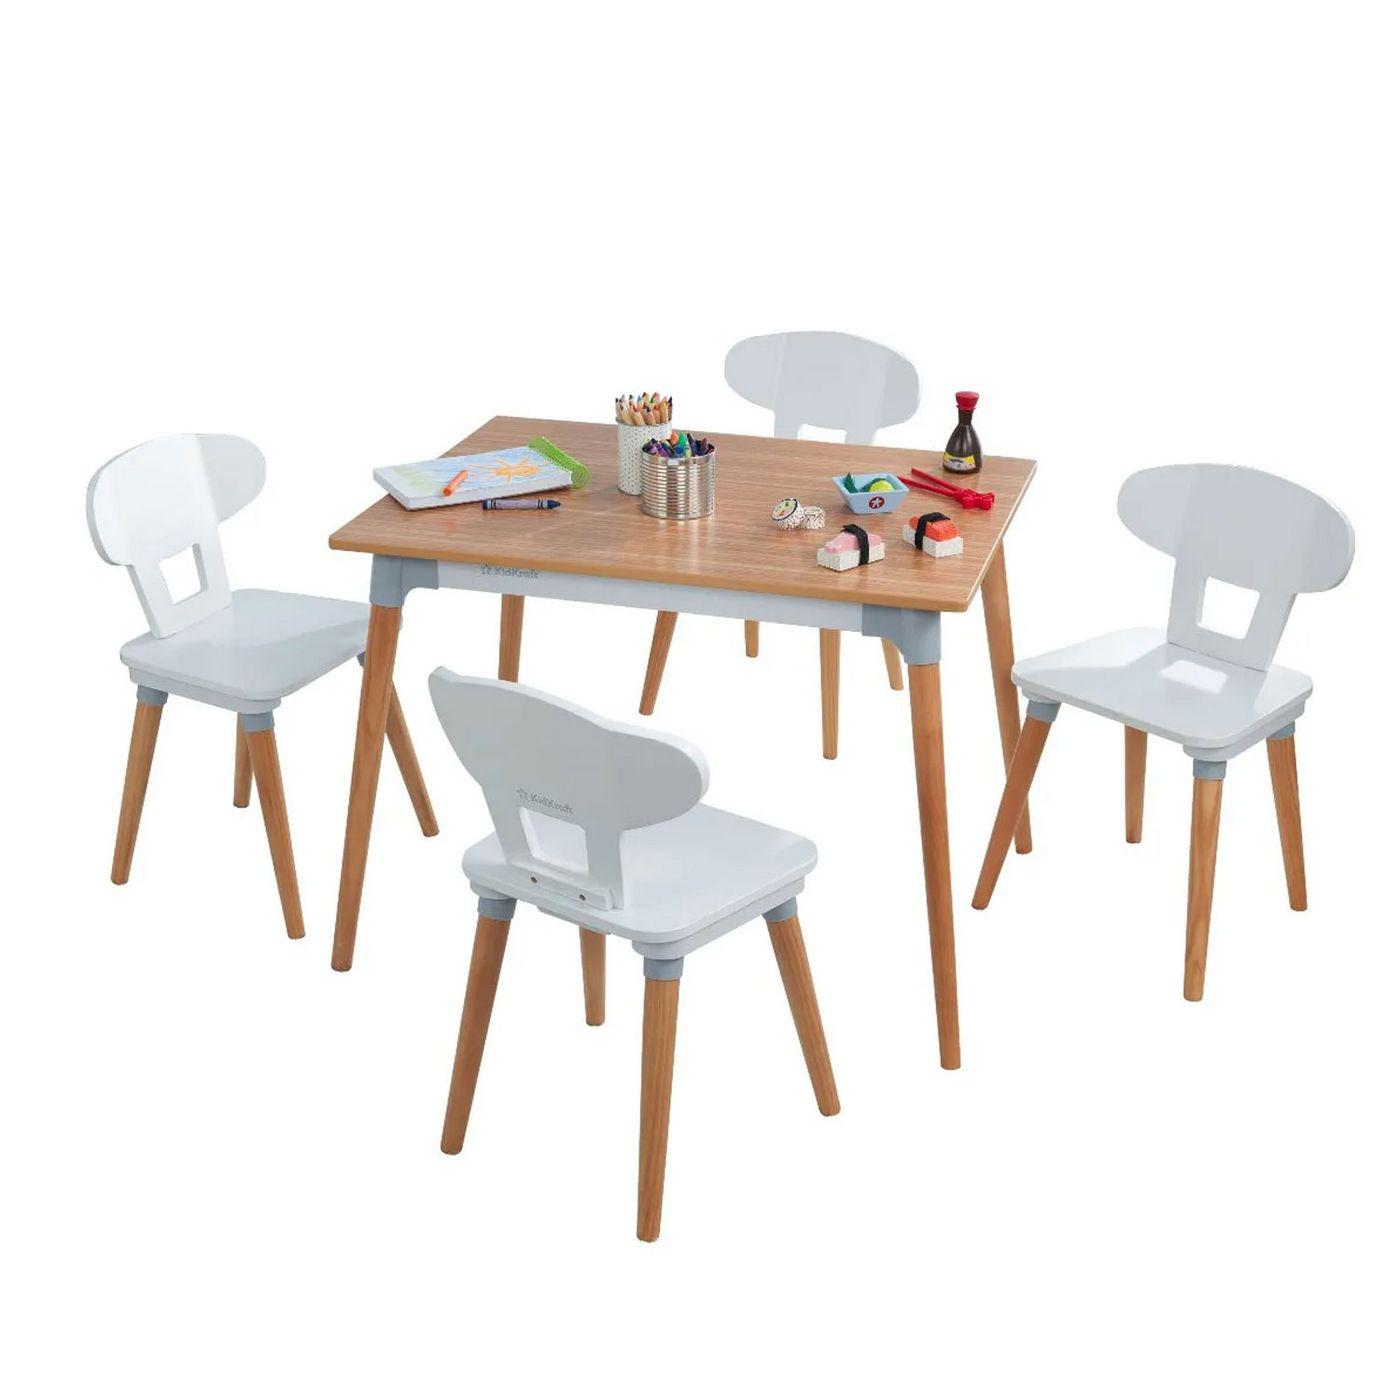 Kidcraft-Midcentury-Modern-Kids-Table-and-Chairs